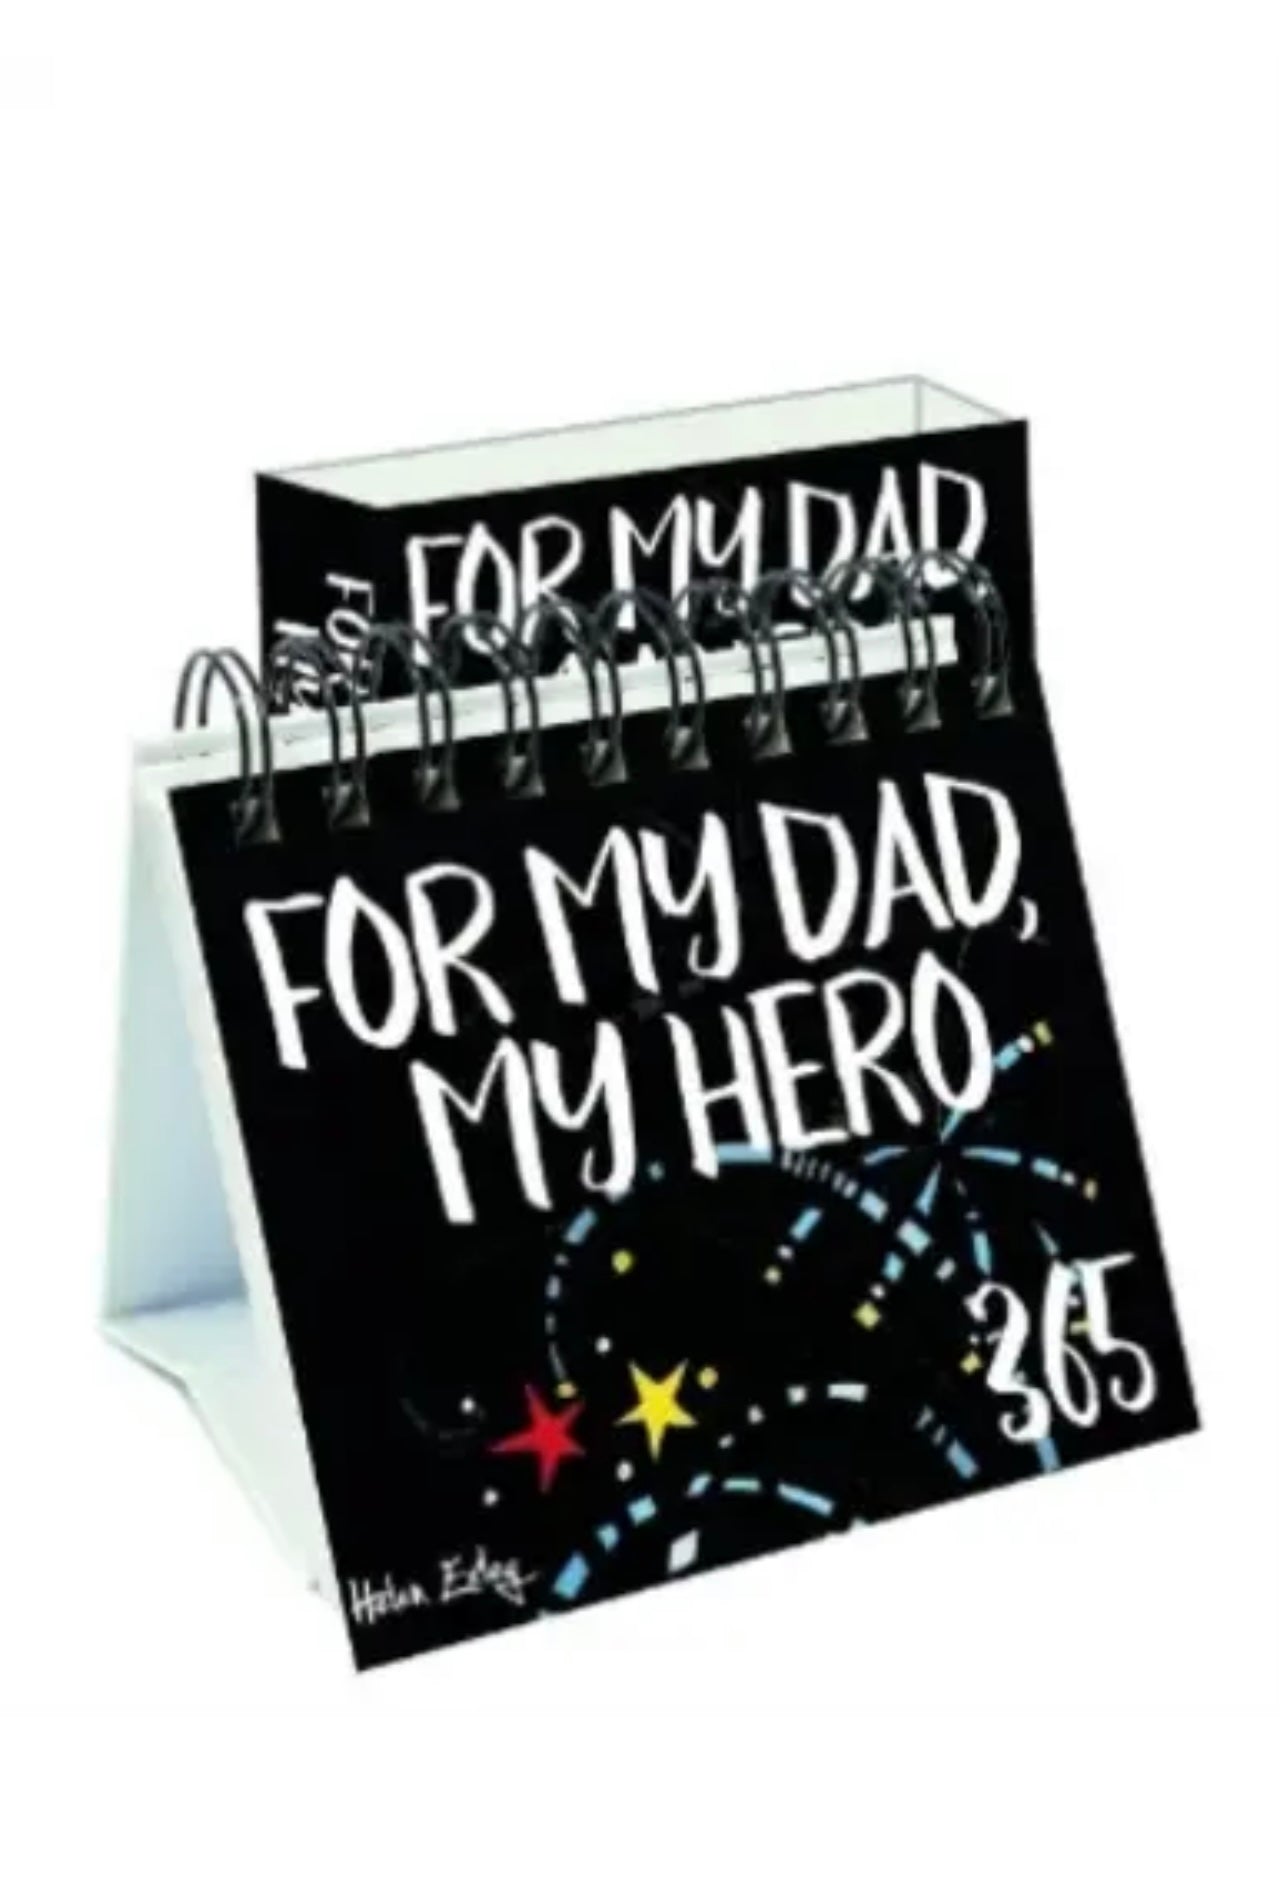 Book - 365 Days For My Dad, My Hero